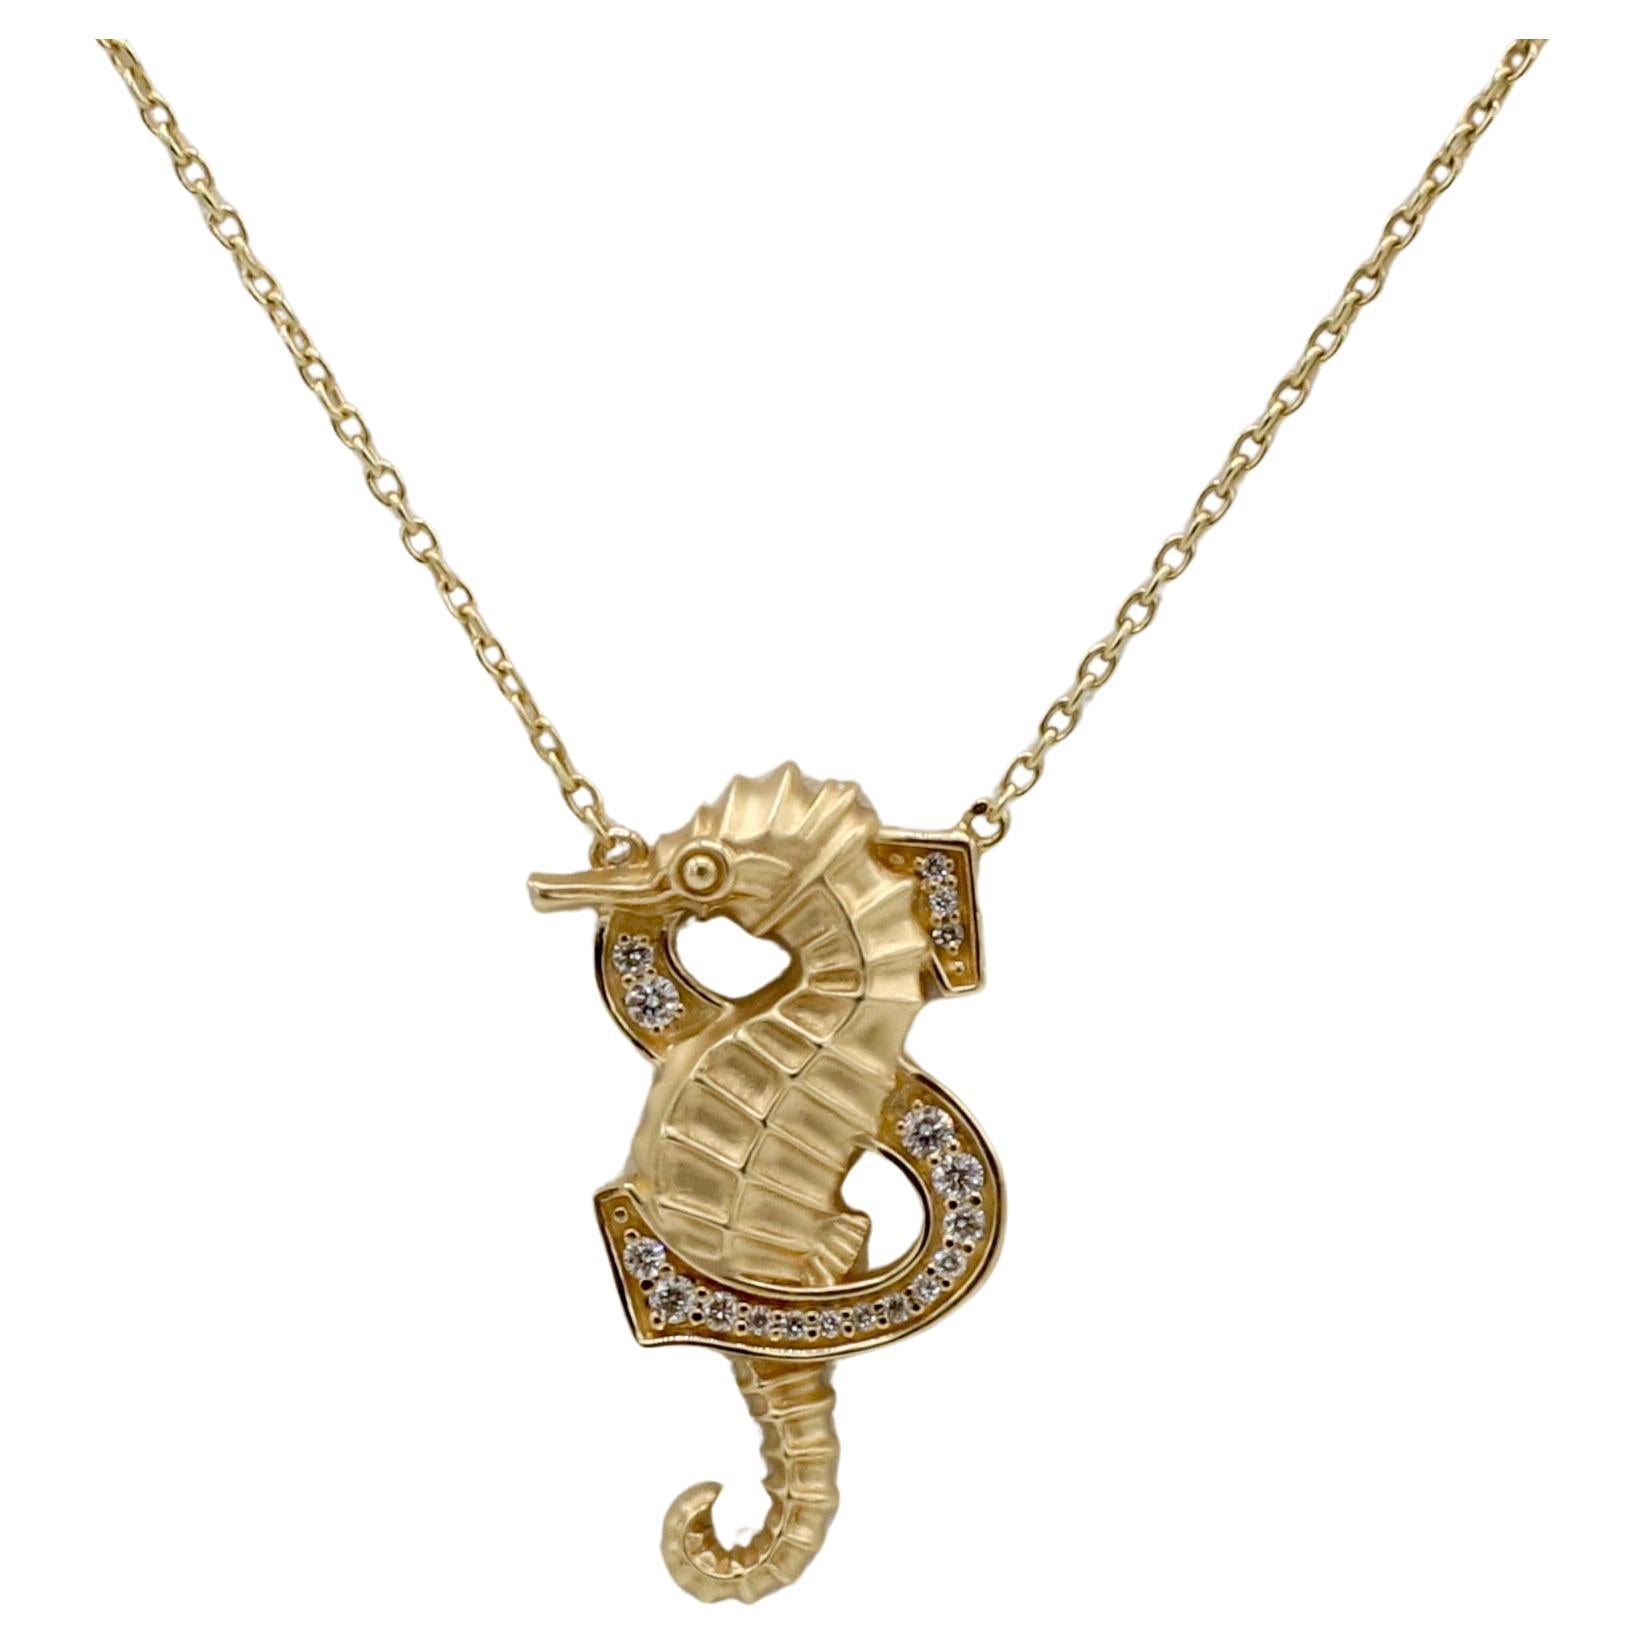 Stephen Webster Fish Tales S is for Seahorse Gold & Natural Diamond Necklace